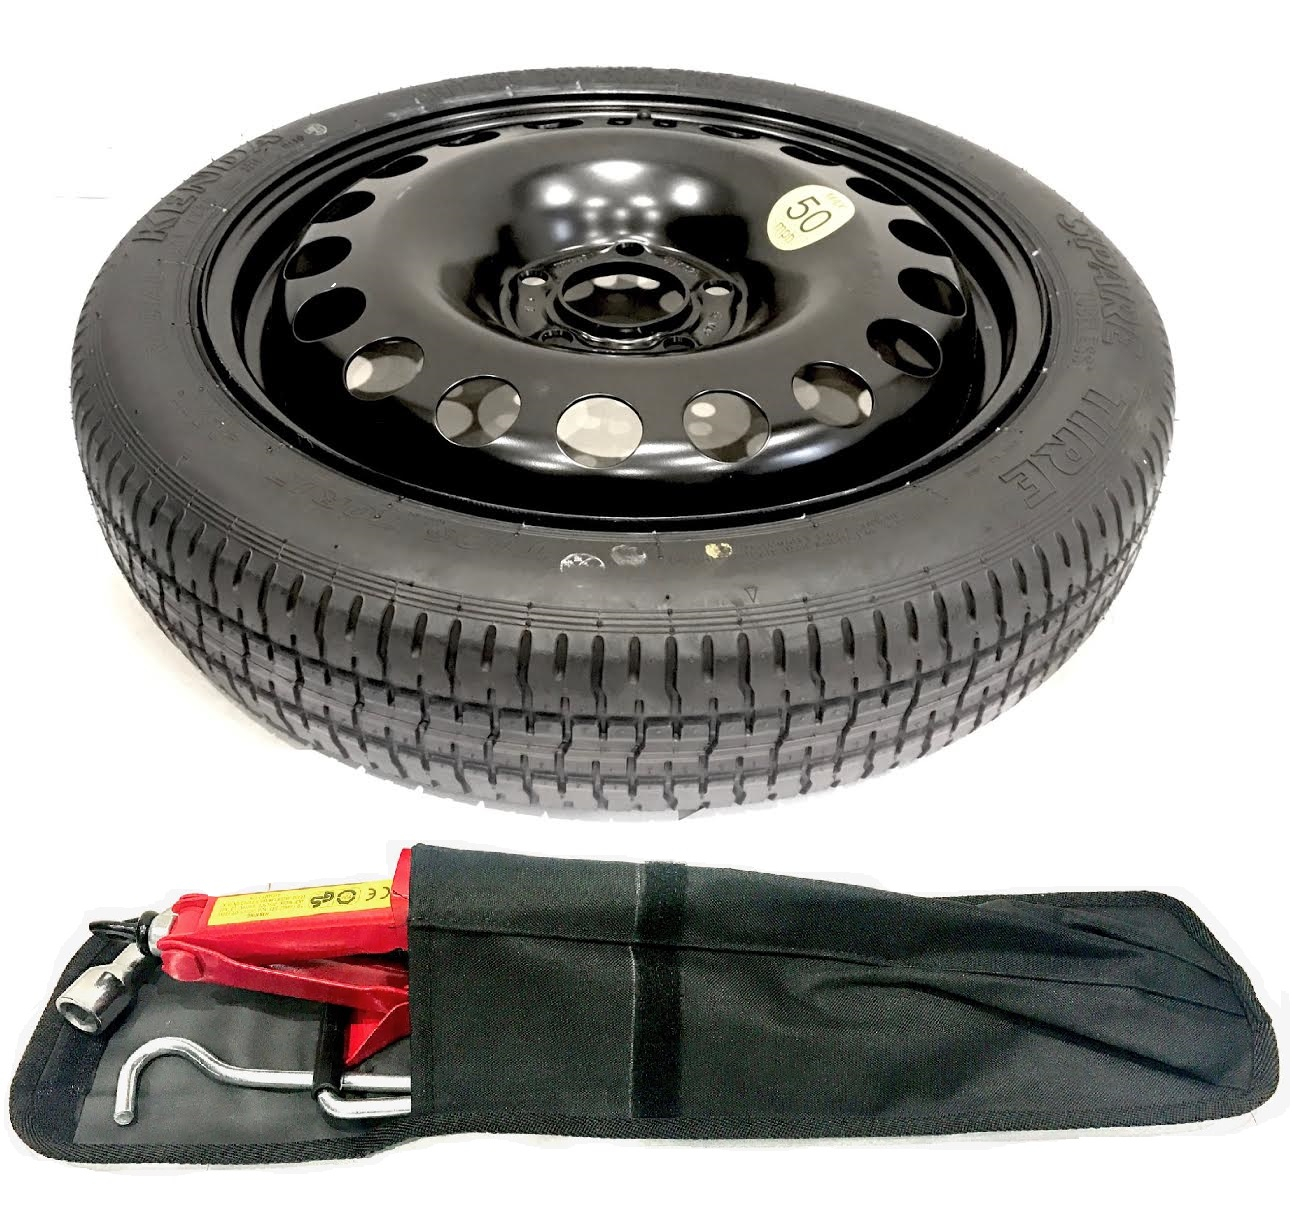 FULL SIZE SPARE WHEEL 16 AND 205/55 R16 TYRE TOOL KIT 2012- PRESENT DAY CITROEN C4 